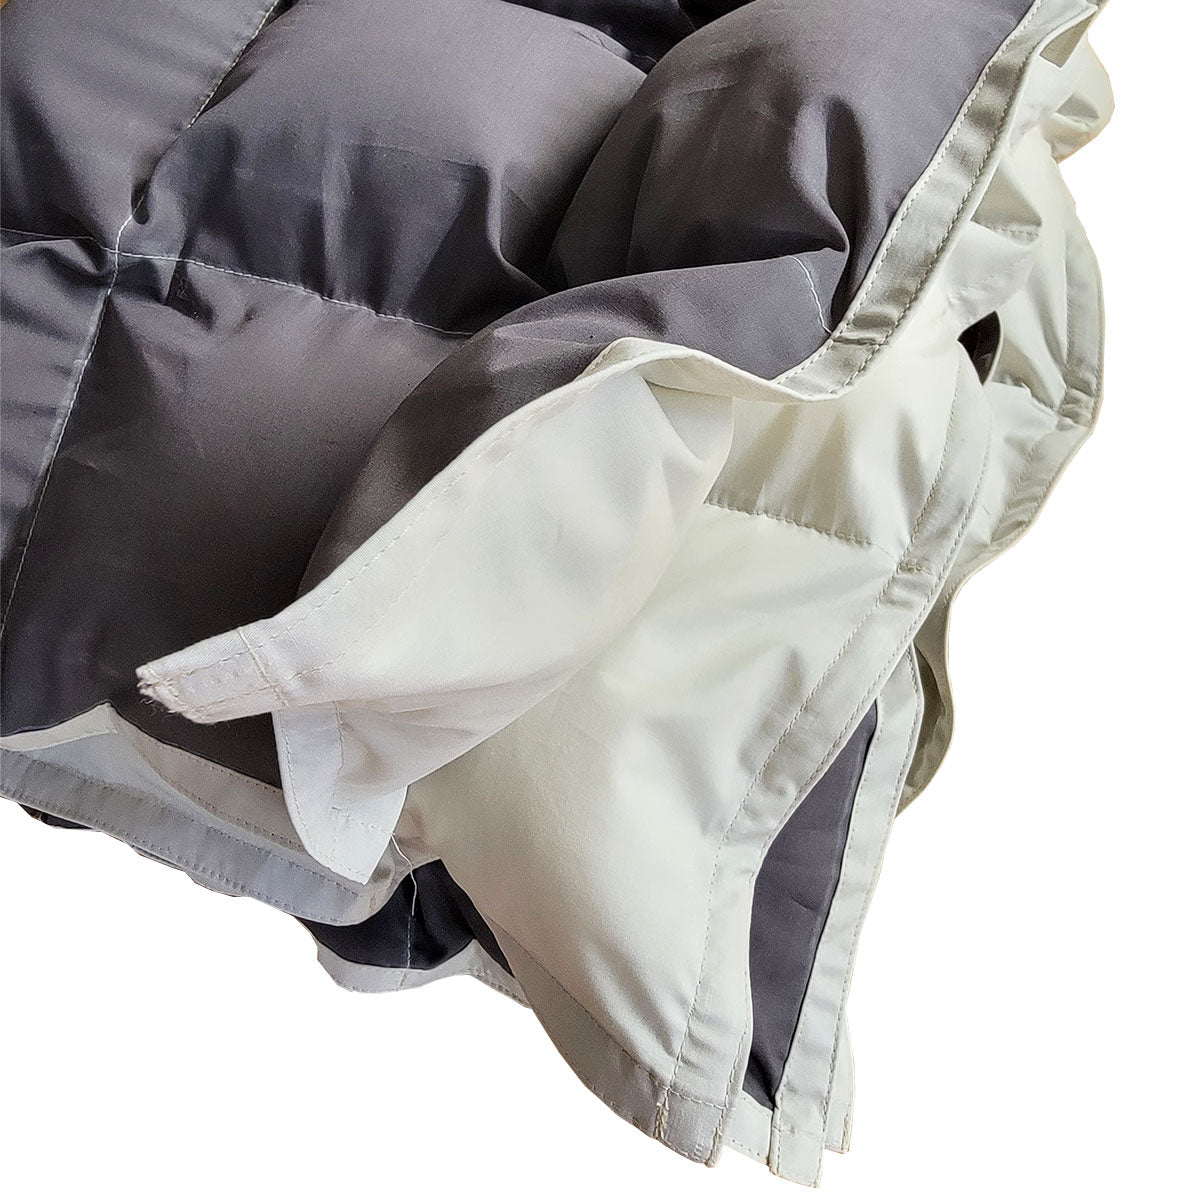 Clearance Weighted Blanket - Medium 8 lb Gray and Off White (for 60lb user)